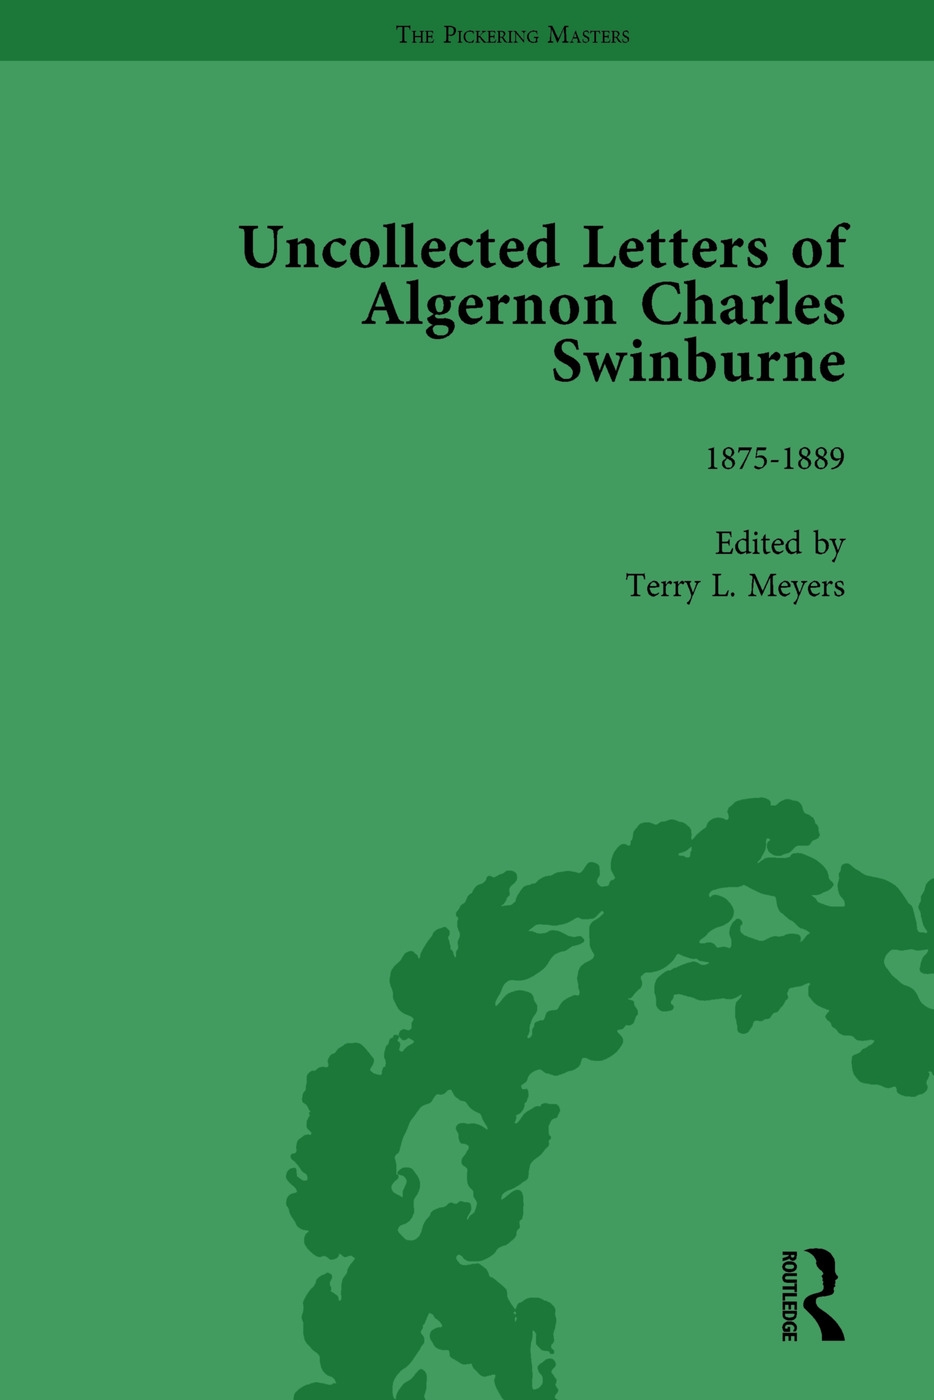 The Uncollected Letters of Algernon Charles Swinburne Vol 2